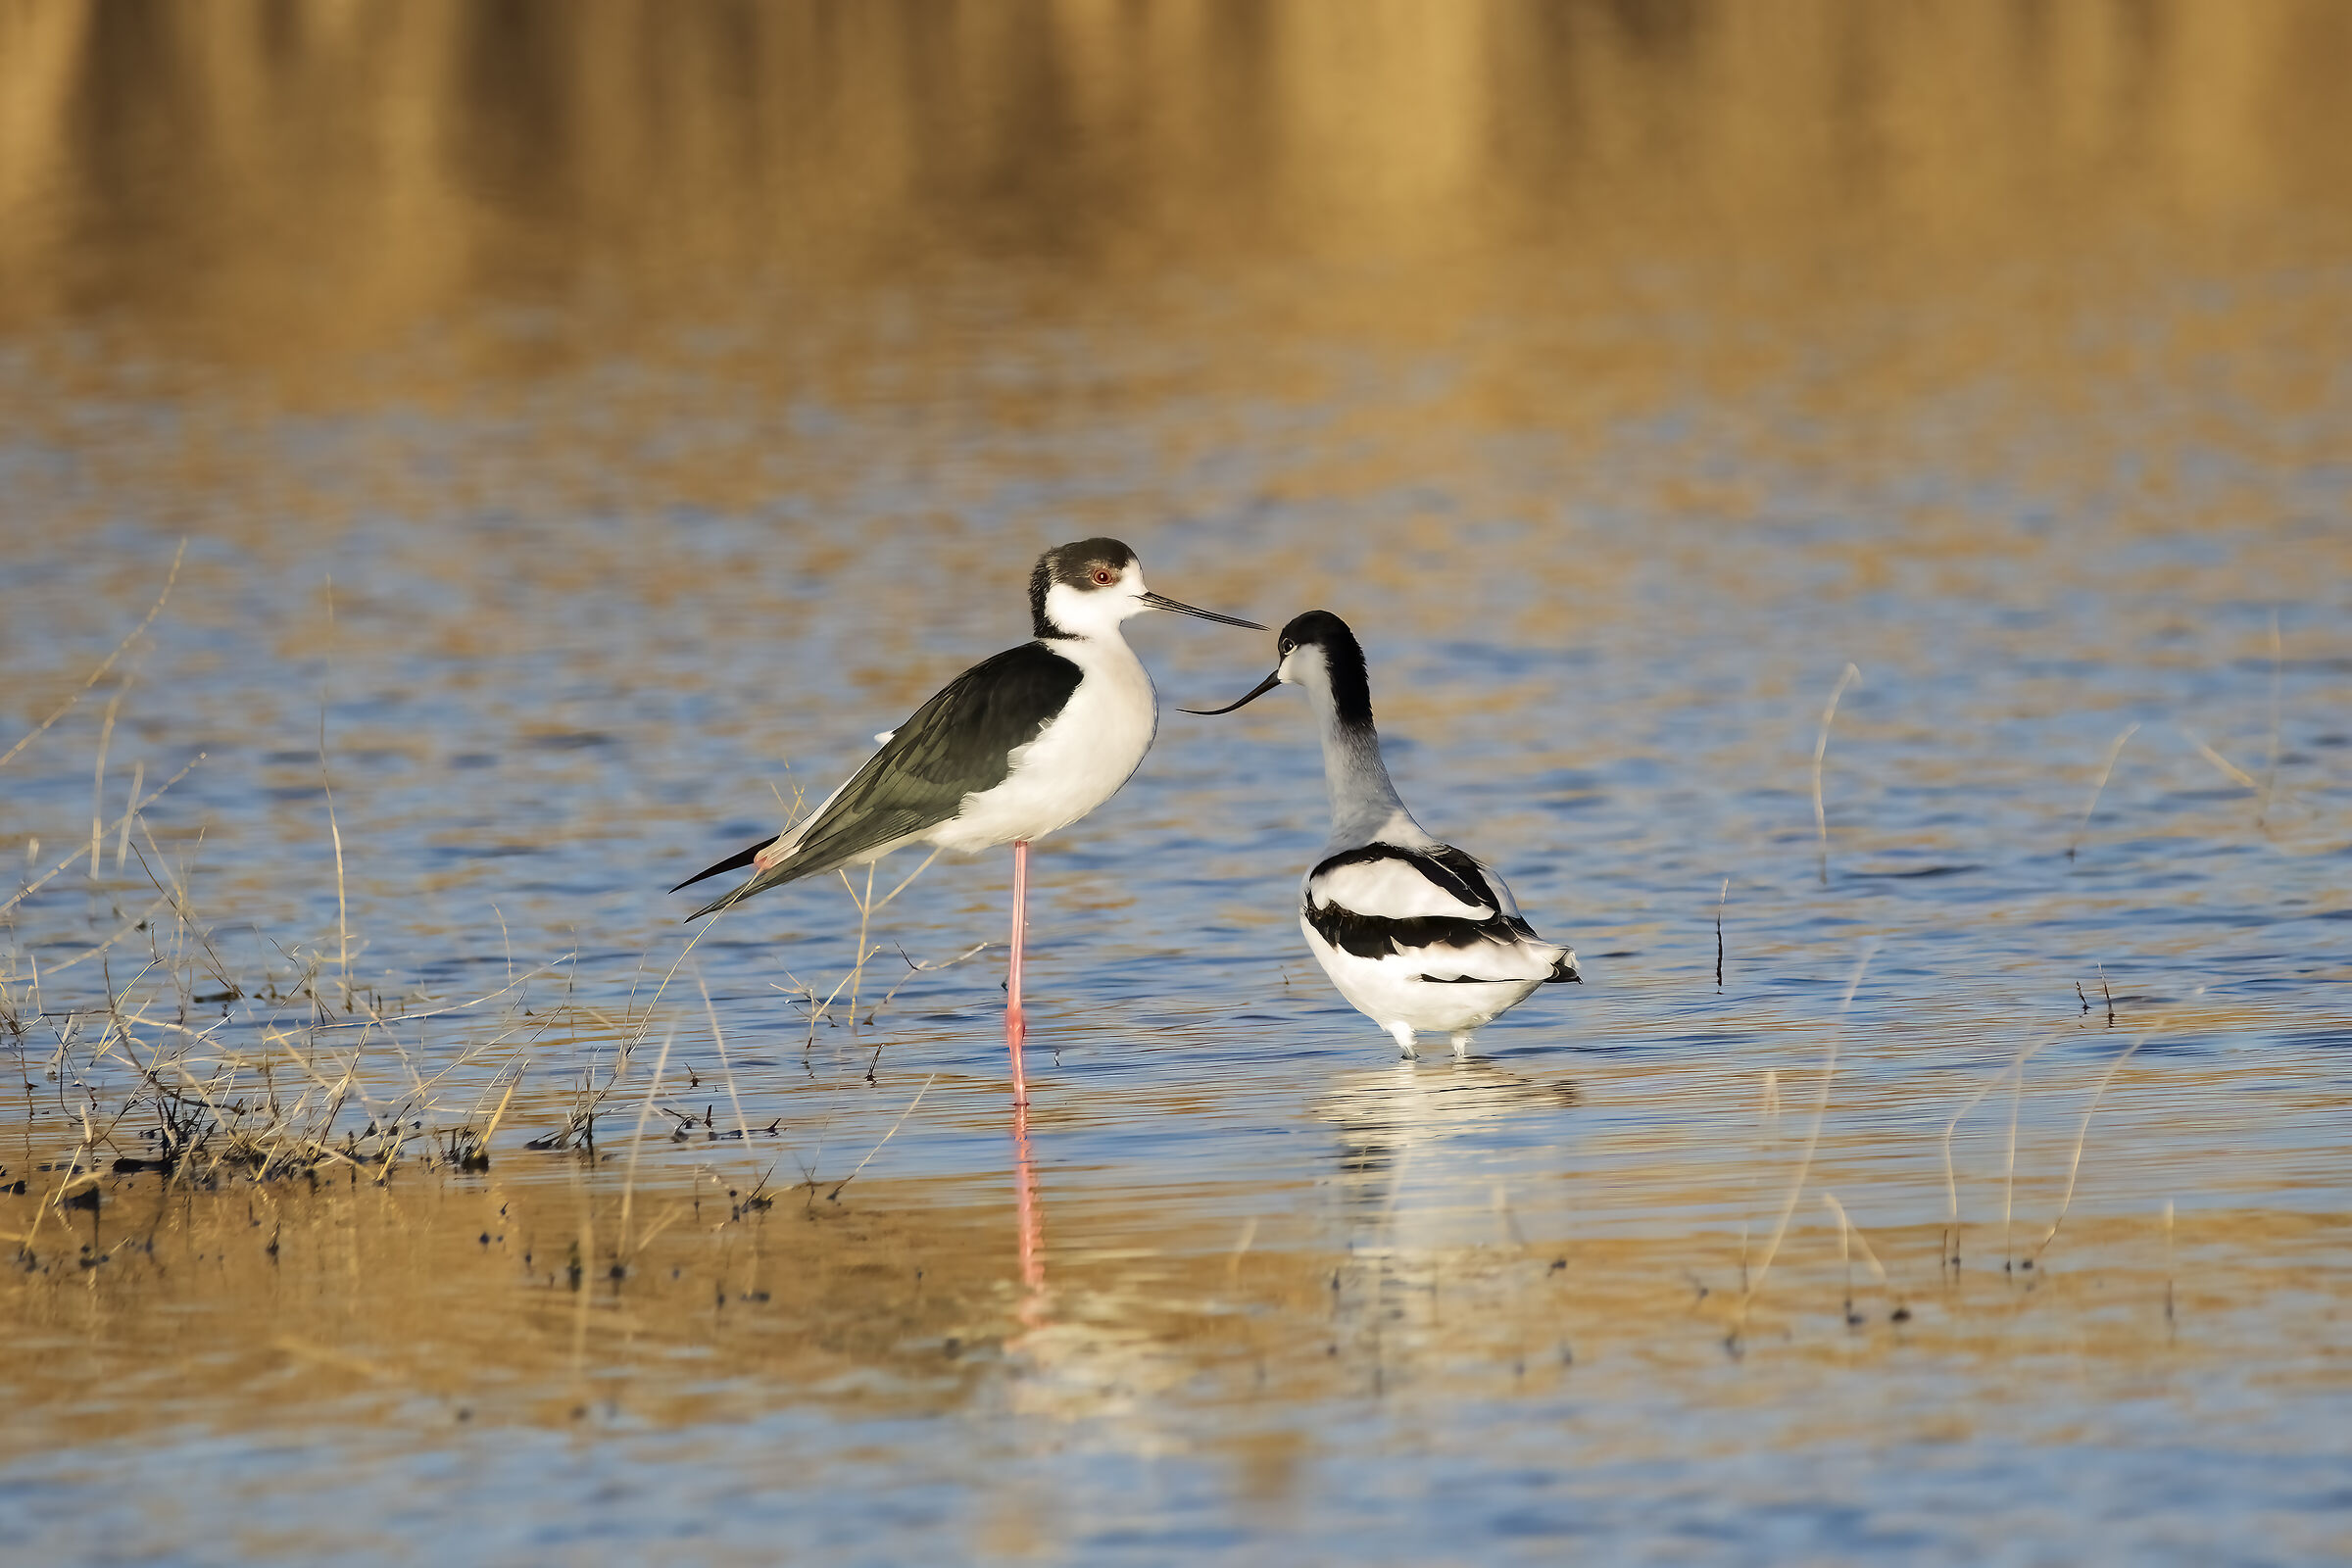 The Knight and the Avocet...